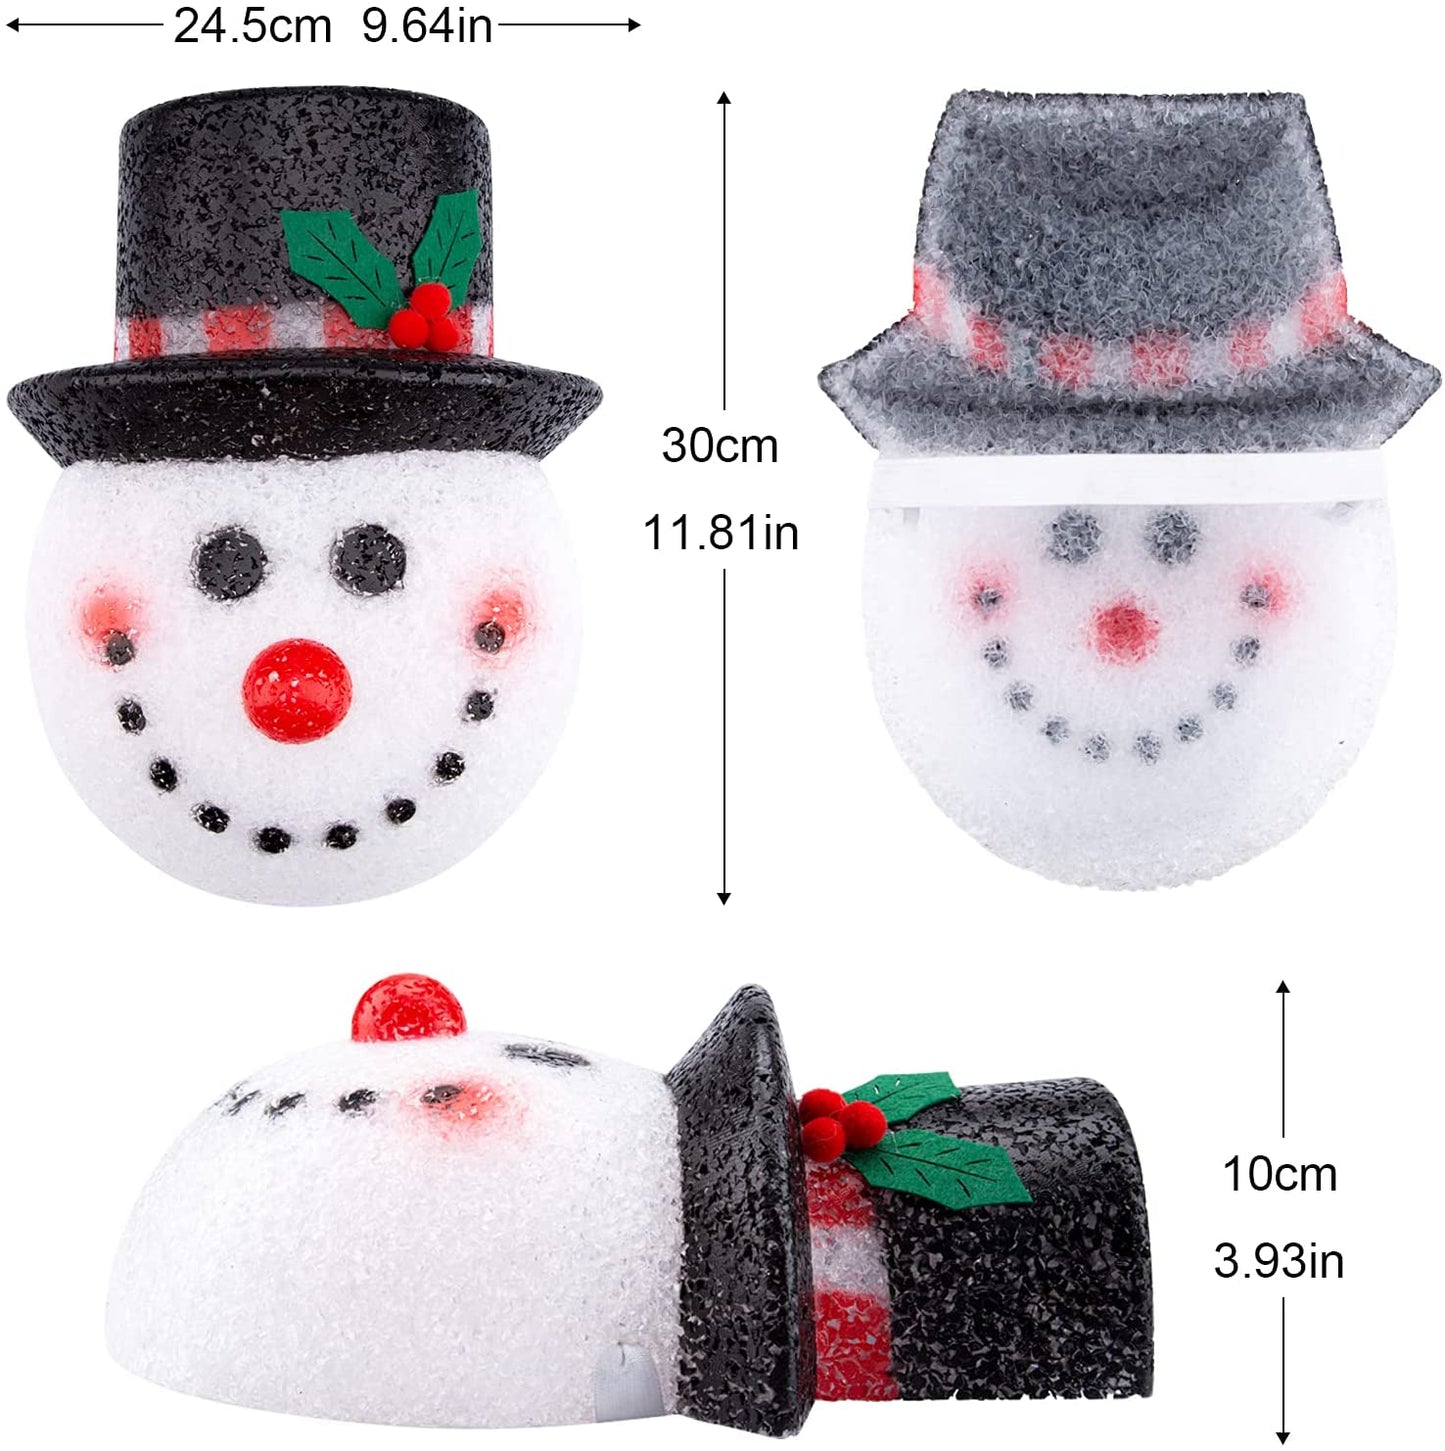 Snowman Porch Light Cover [BUY 3 FREE SHIPPING]